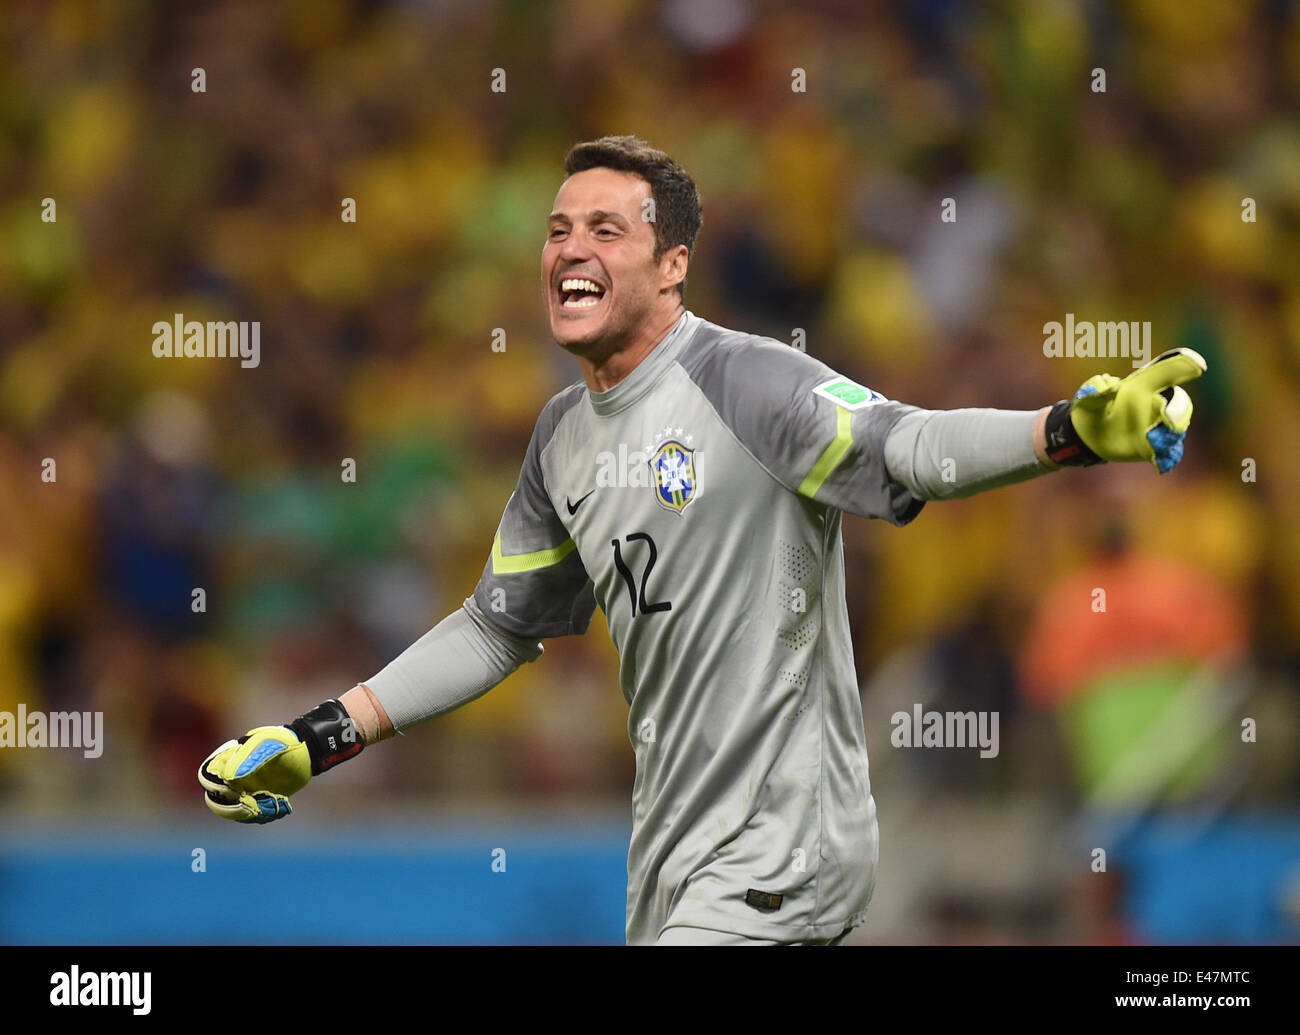 Fortaleza, Brazil. 04th July, 2014. Goalkeeper Julio Cesar of Brazil celebrates during the FIFA World Cup 2014 quarter final match soccer between Brazil and Colombia at the Estadio Castelao in Fortaleza, Brazil, 04 July 2014. Photo: Marius Becker/dpa/Alamy Live News Stock Photo